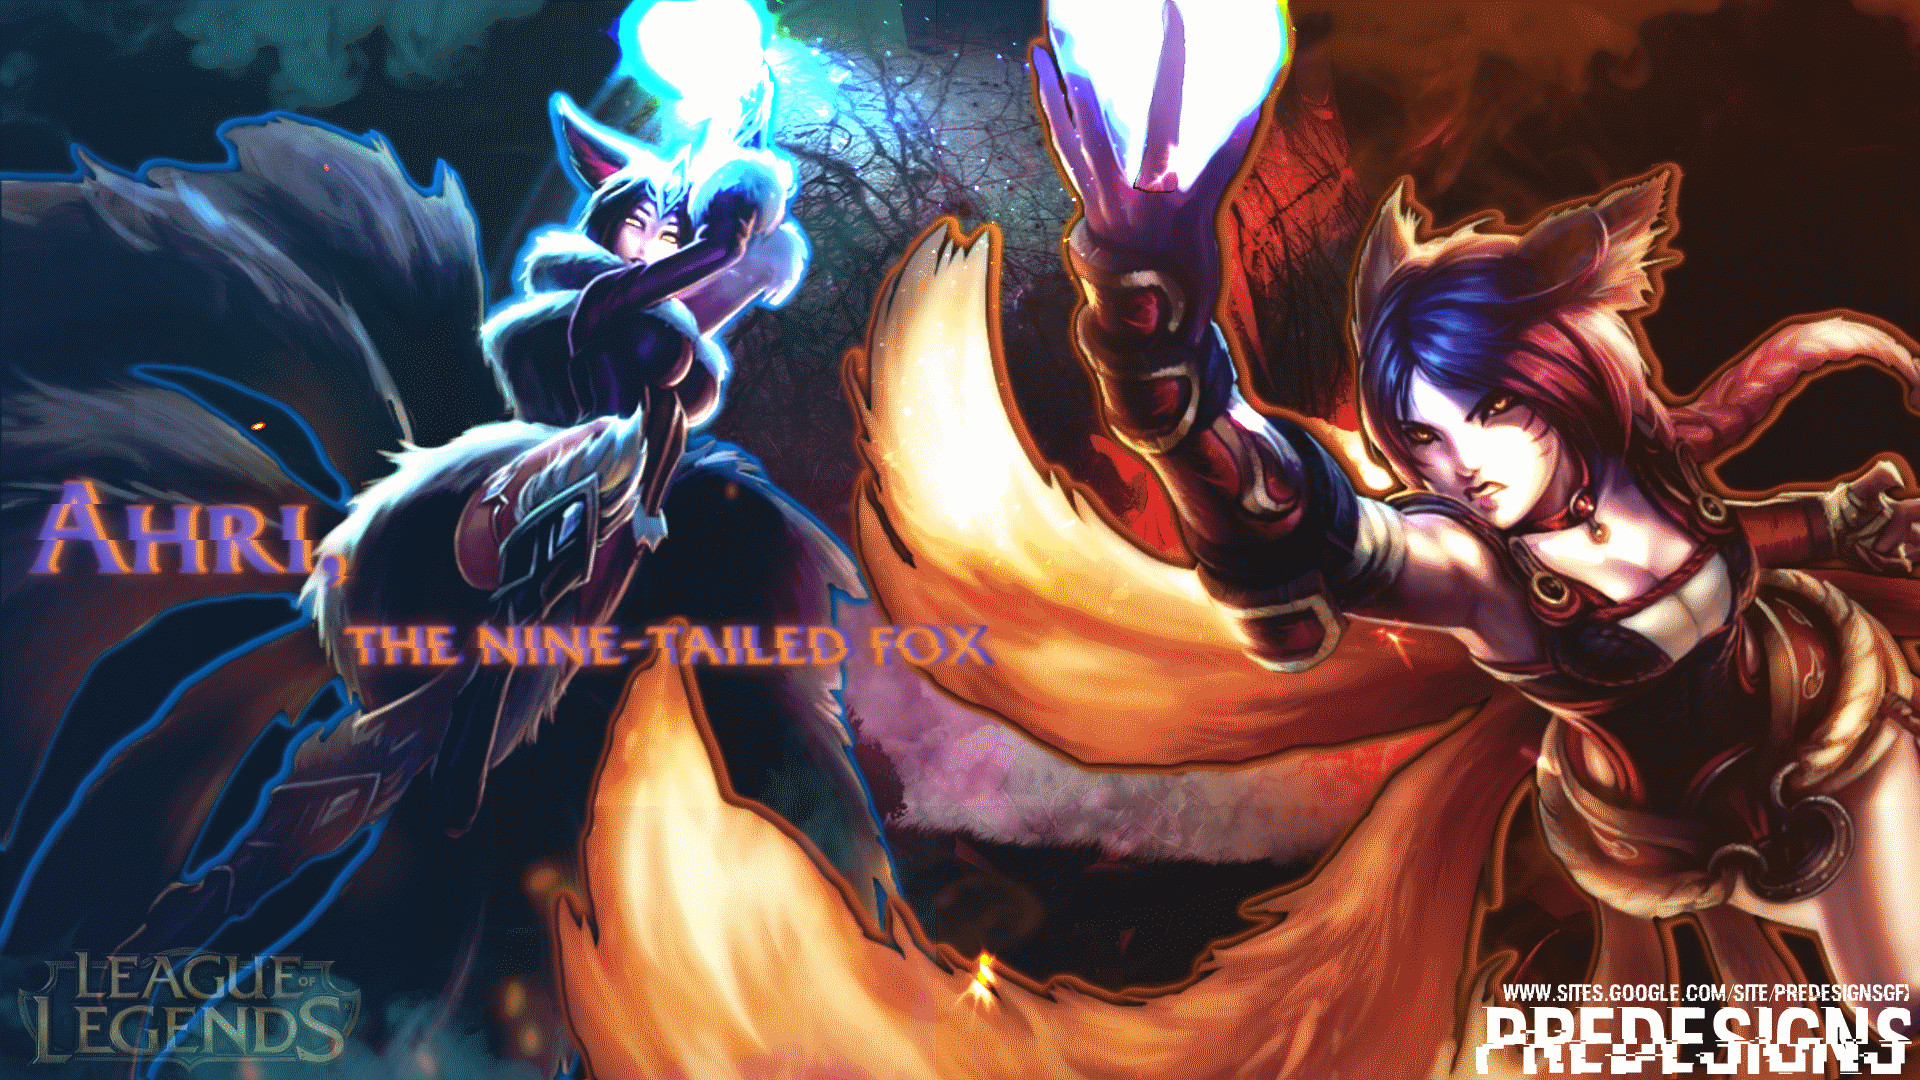 1920x1080 ... Of Legends) Ahri, the Nine-Tailed Fox EDIT by Predesigns